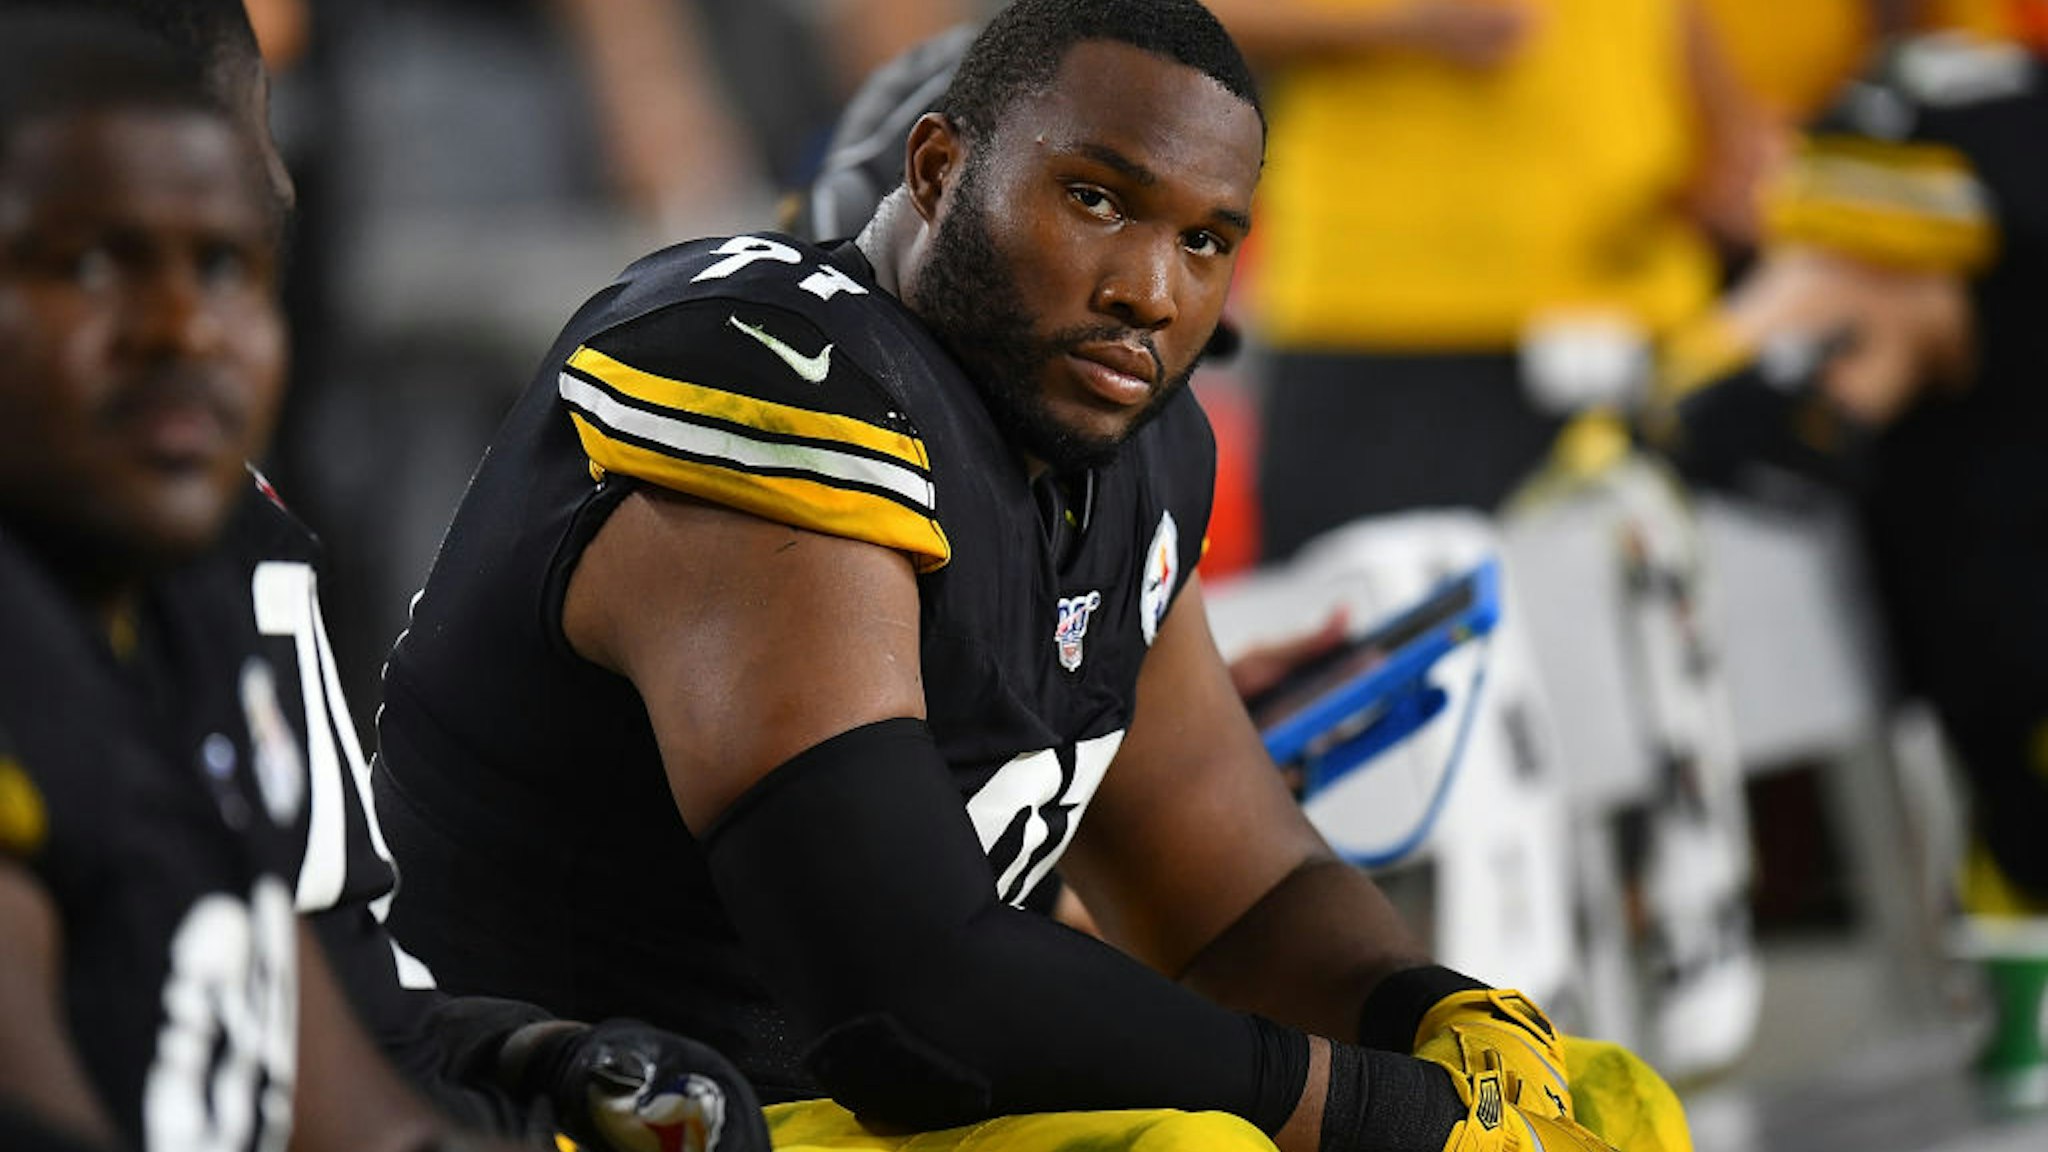 Stephon Tuitt #91 of the Pittsburgh Steelers looks on during the game against the Cincinnati Bengals at Heinz Field on September 30, 2019 in Pittsburgh, Pennsylvania.